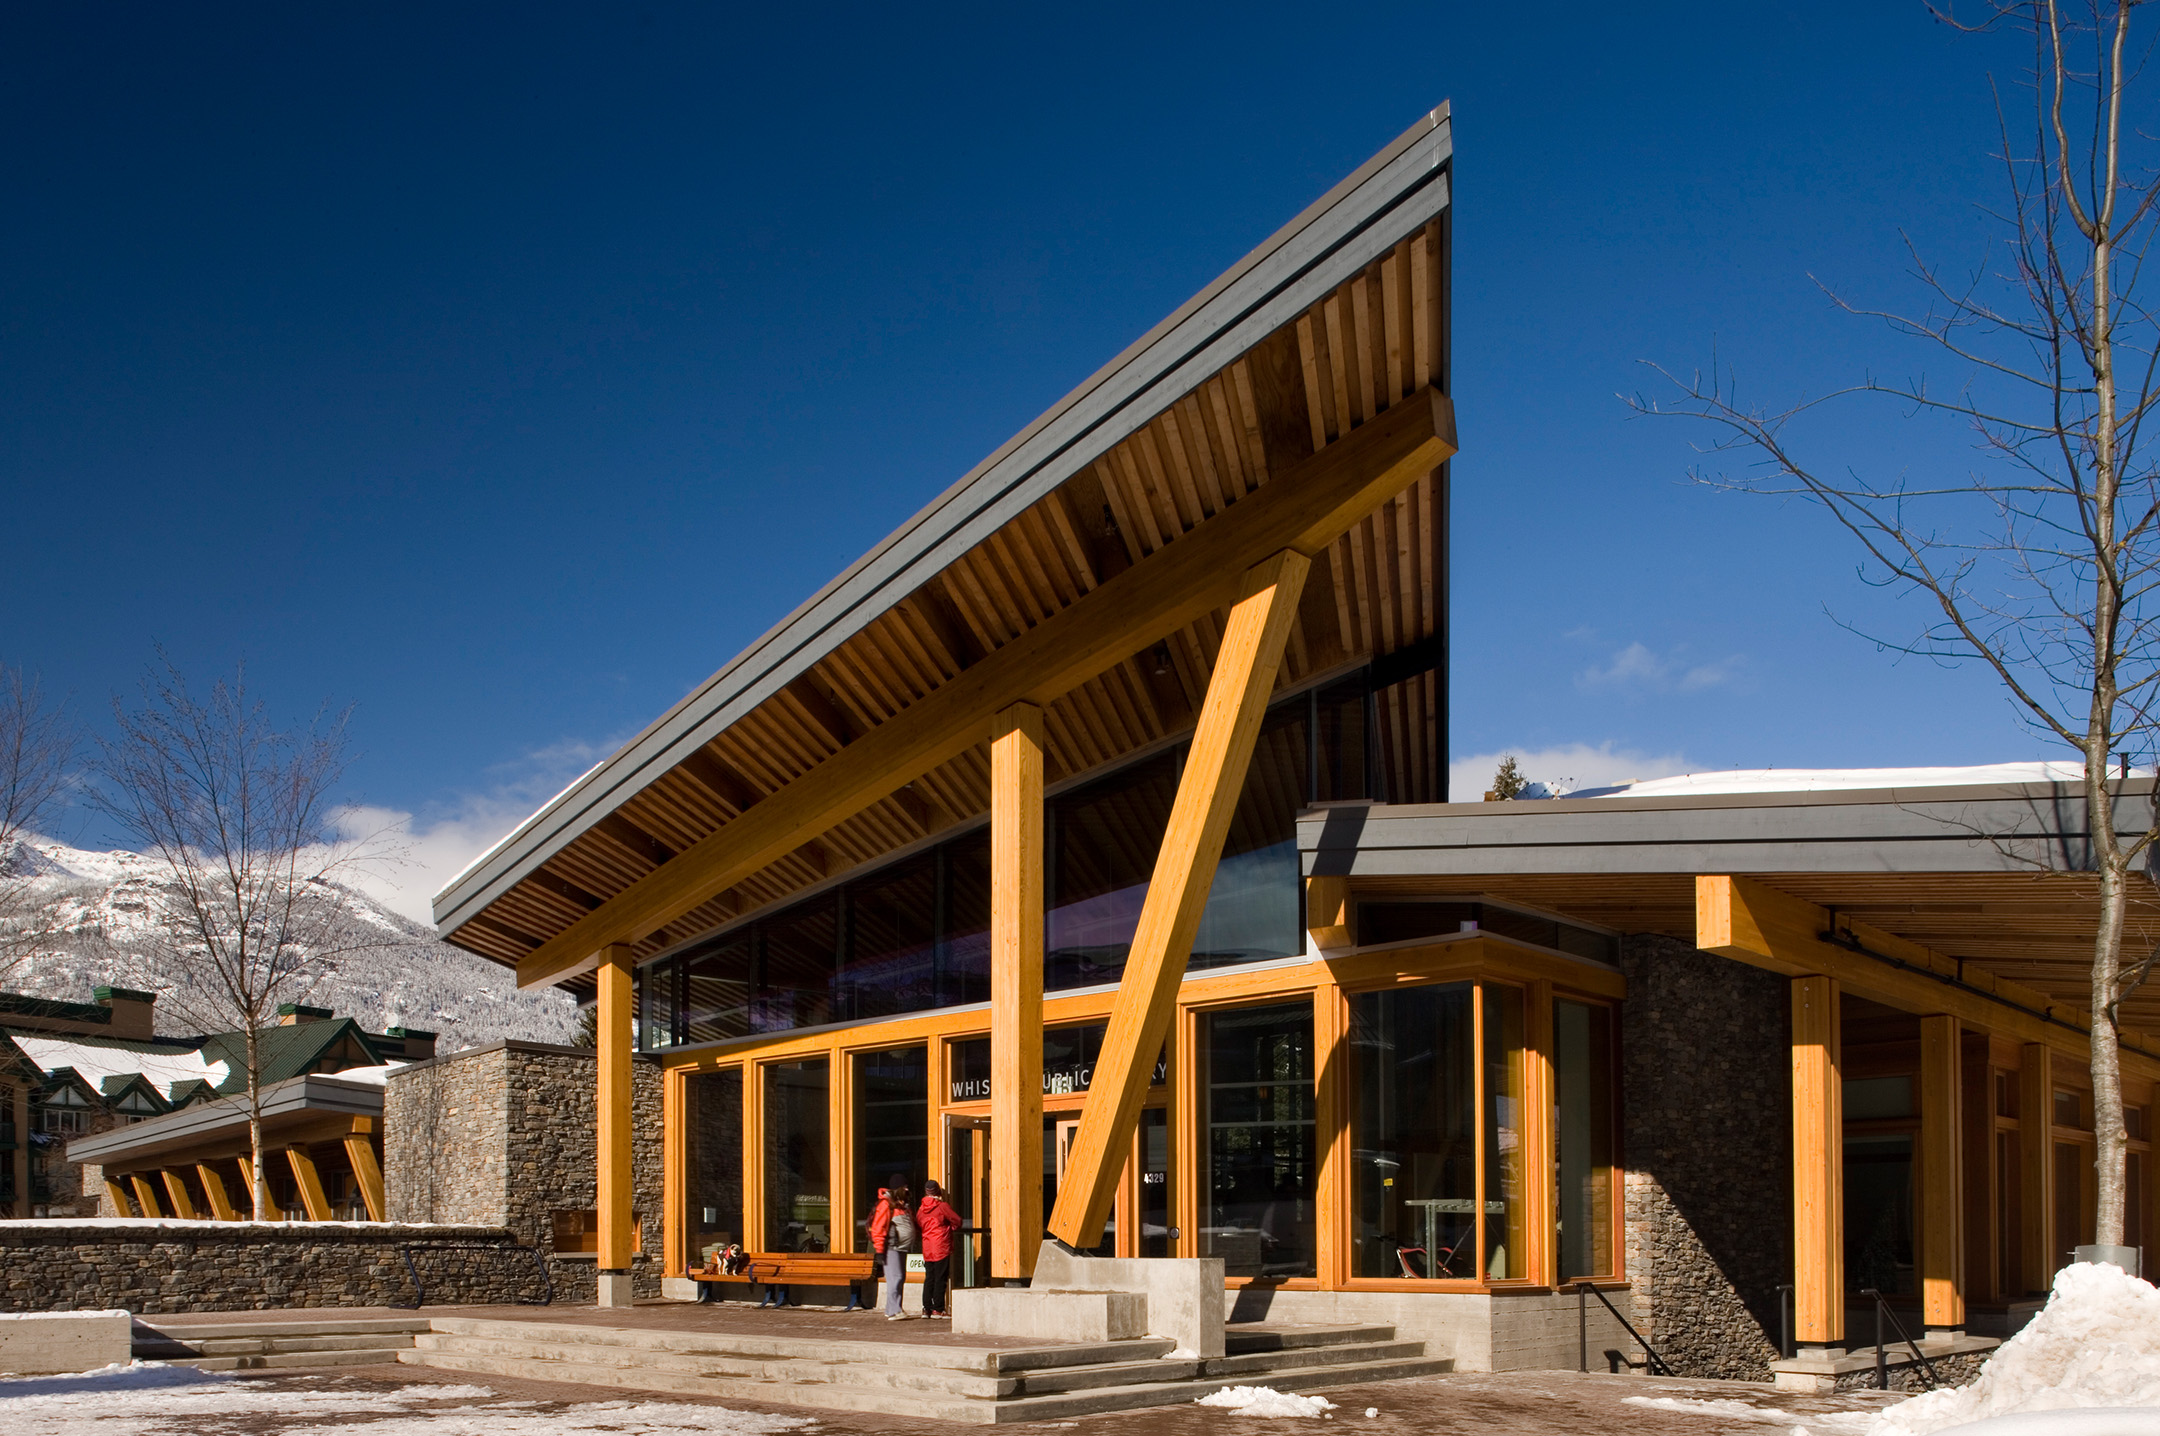 Exterior of the Whistler Public Library, highlighting the mono-pitched roof and wood structure among a mountainous backdrop.